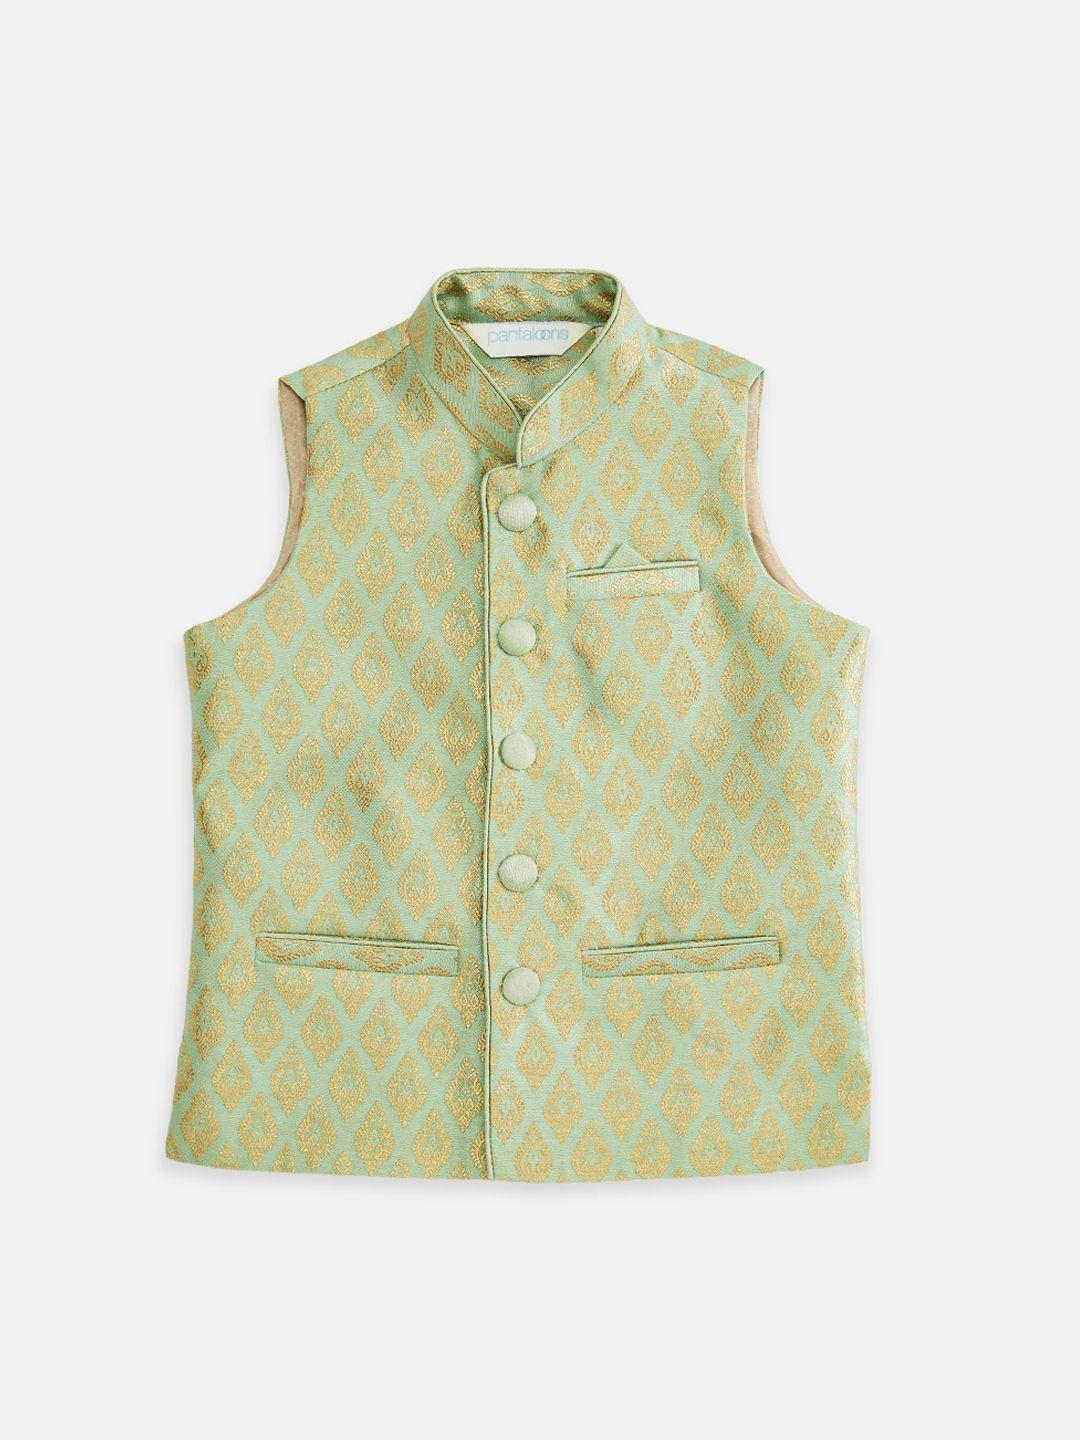 indus route by pantaloons boys green & gold woven design waistcoat